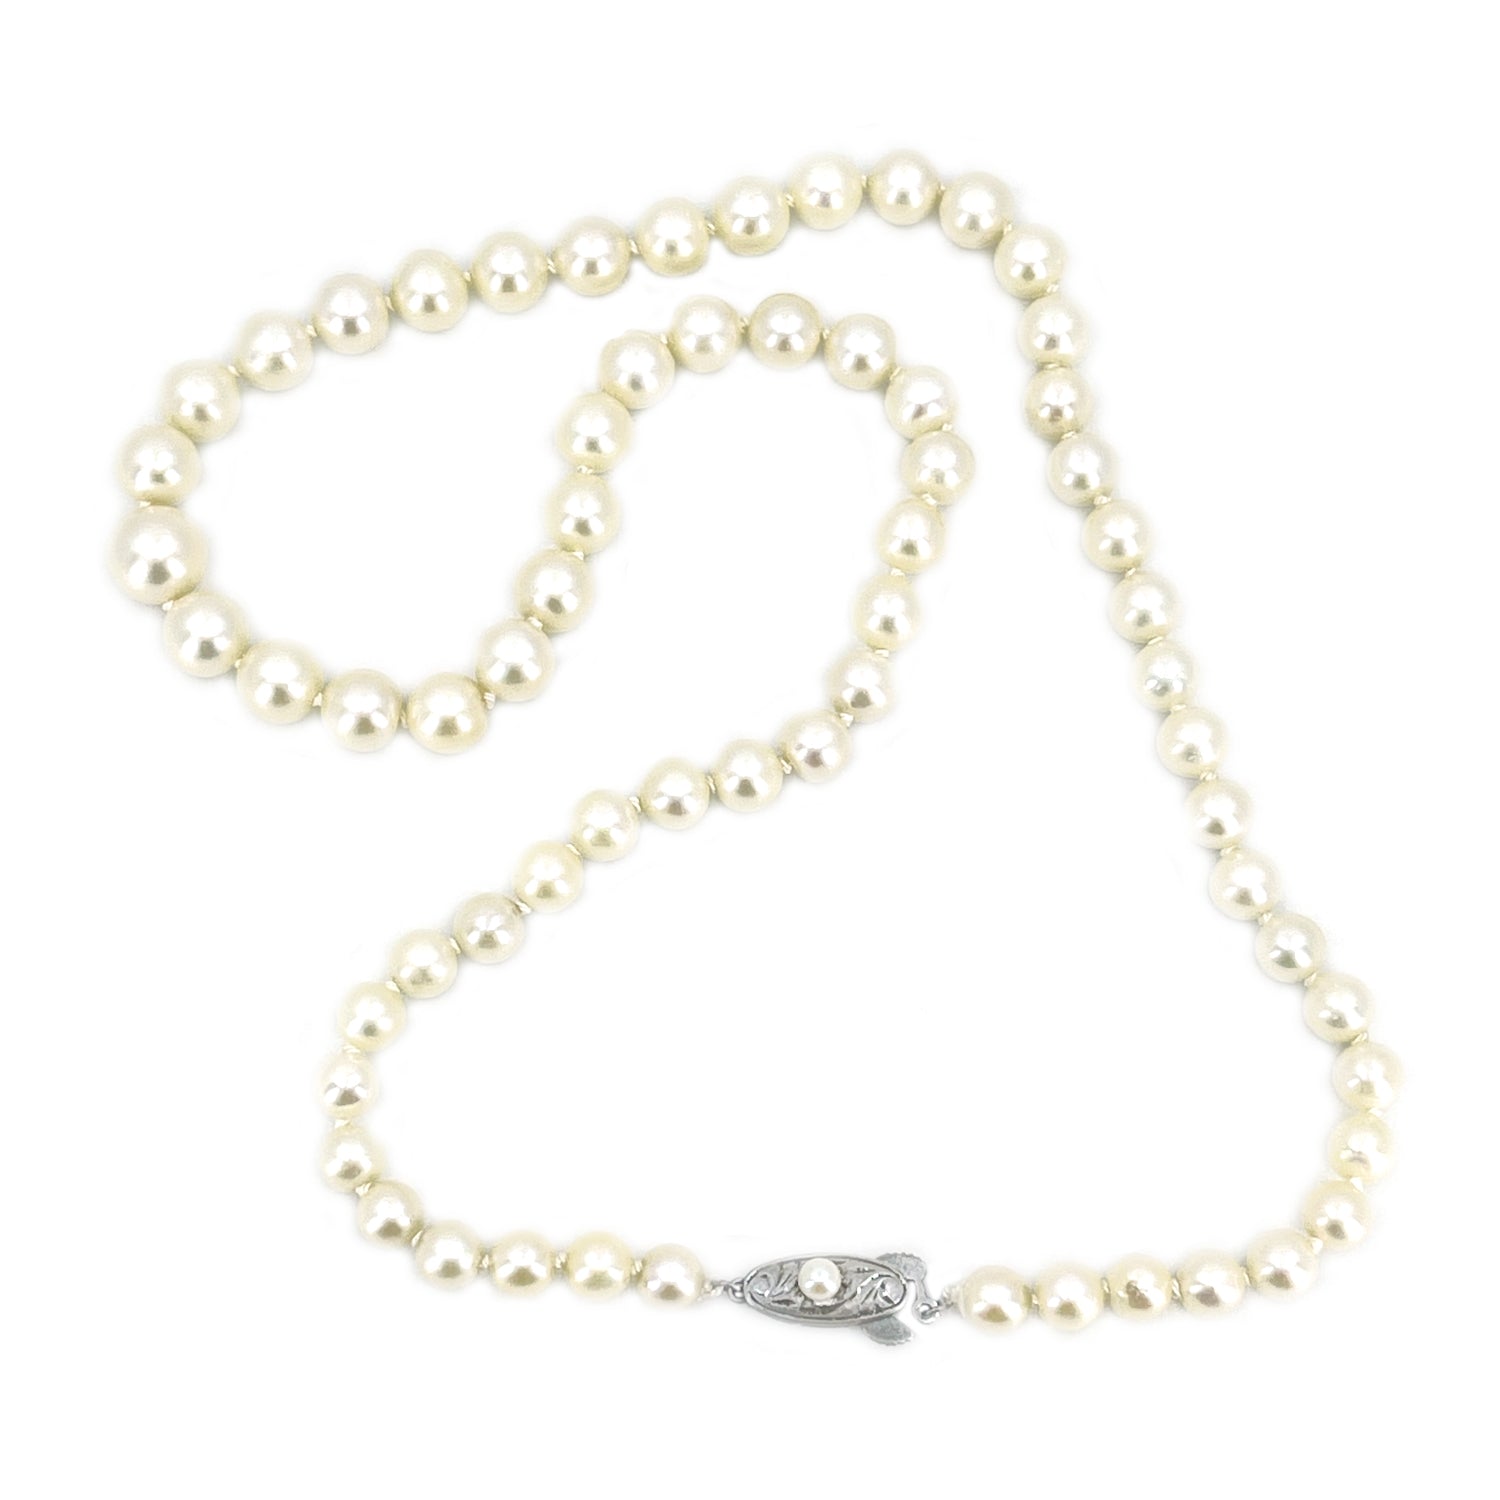 Art Deco Japanese Saltwater Cultured Akoya Pearl Graduated Vintage Necklace - Sterling Silver 19.50 Inch